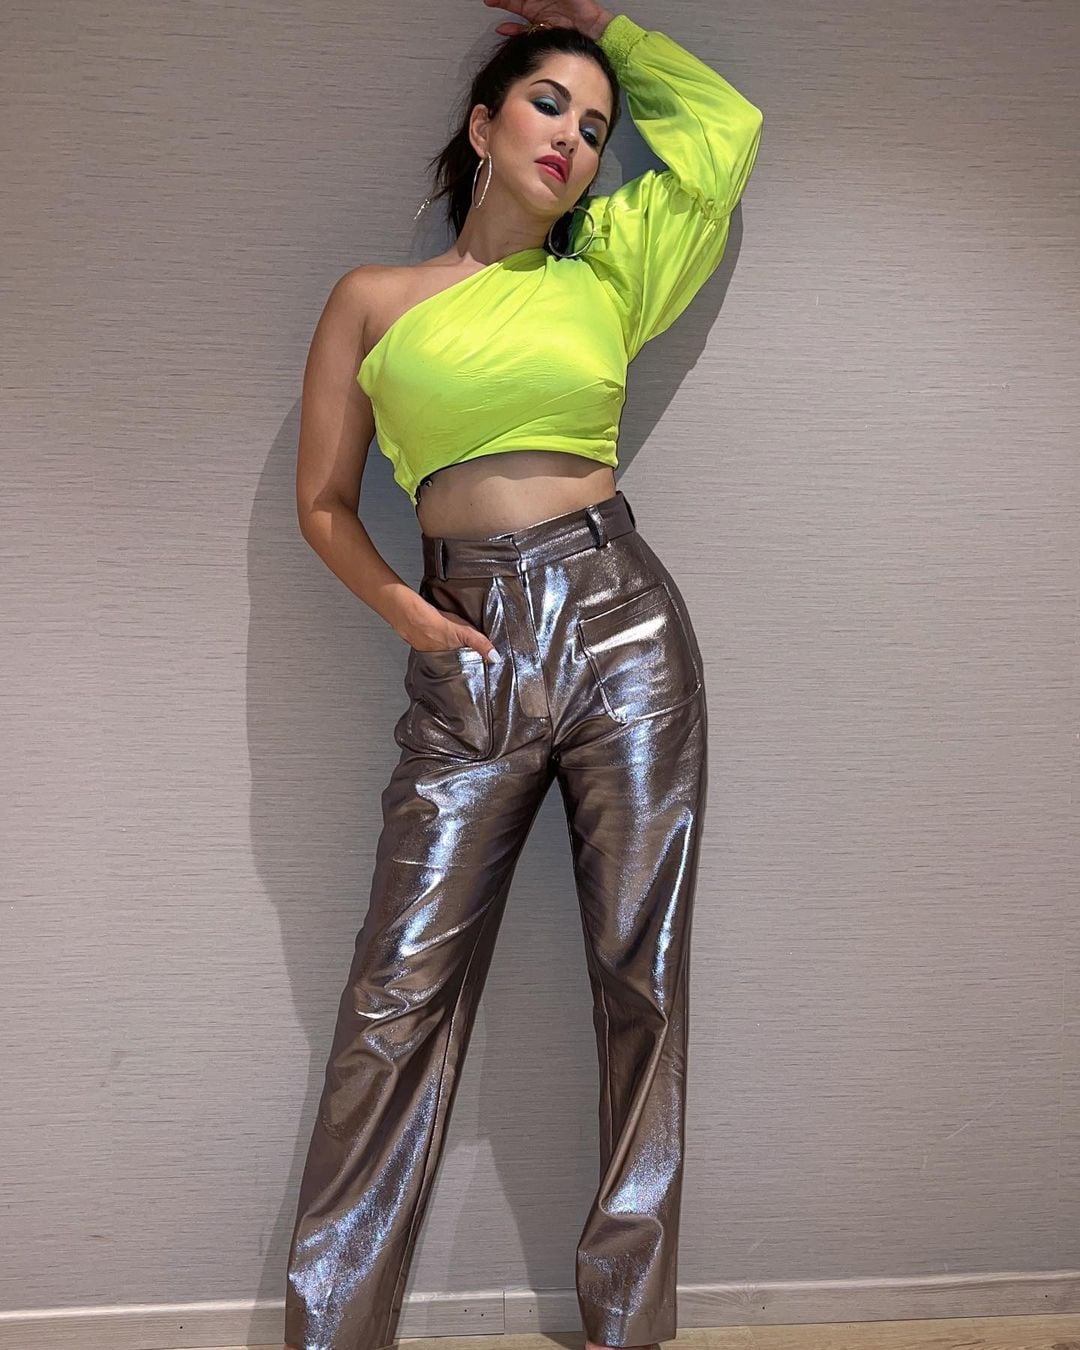 Sunny Leone looks glam in the crop top and silver metallic pants